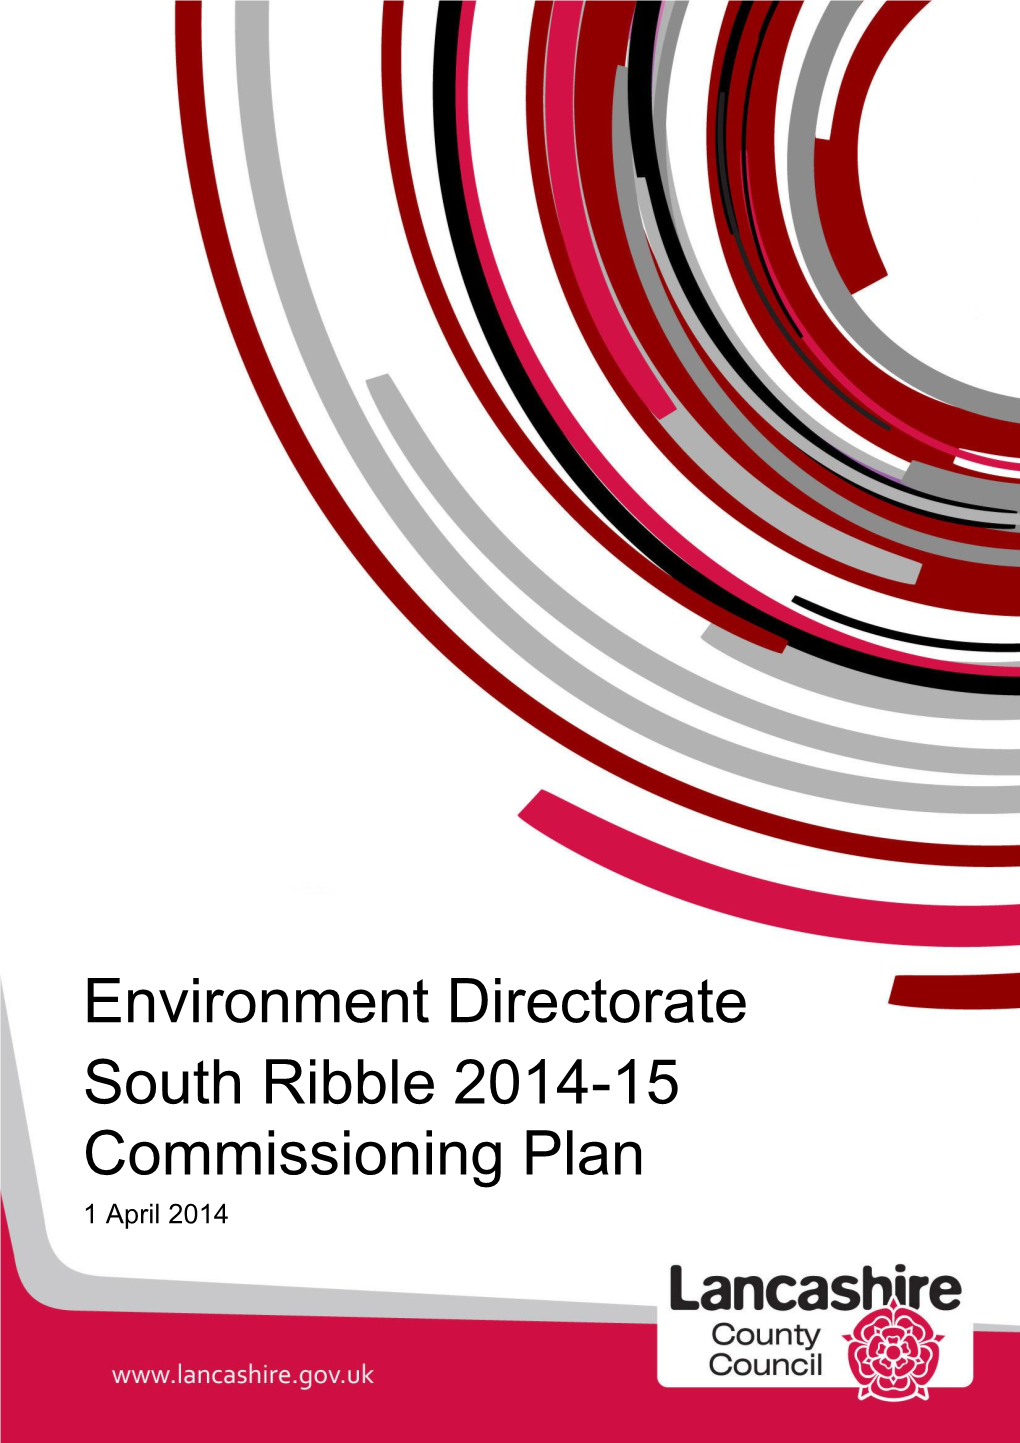 Environment Directorate South Ribble 2014-15 Commissioning Plan 1 April 2014 2014-15 South Ribble Commissioning Plan